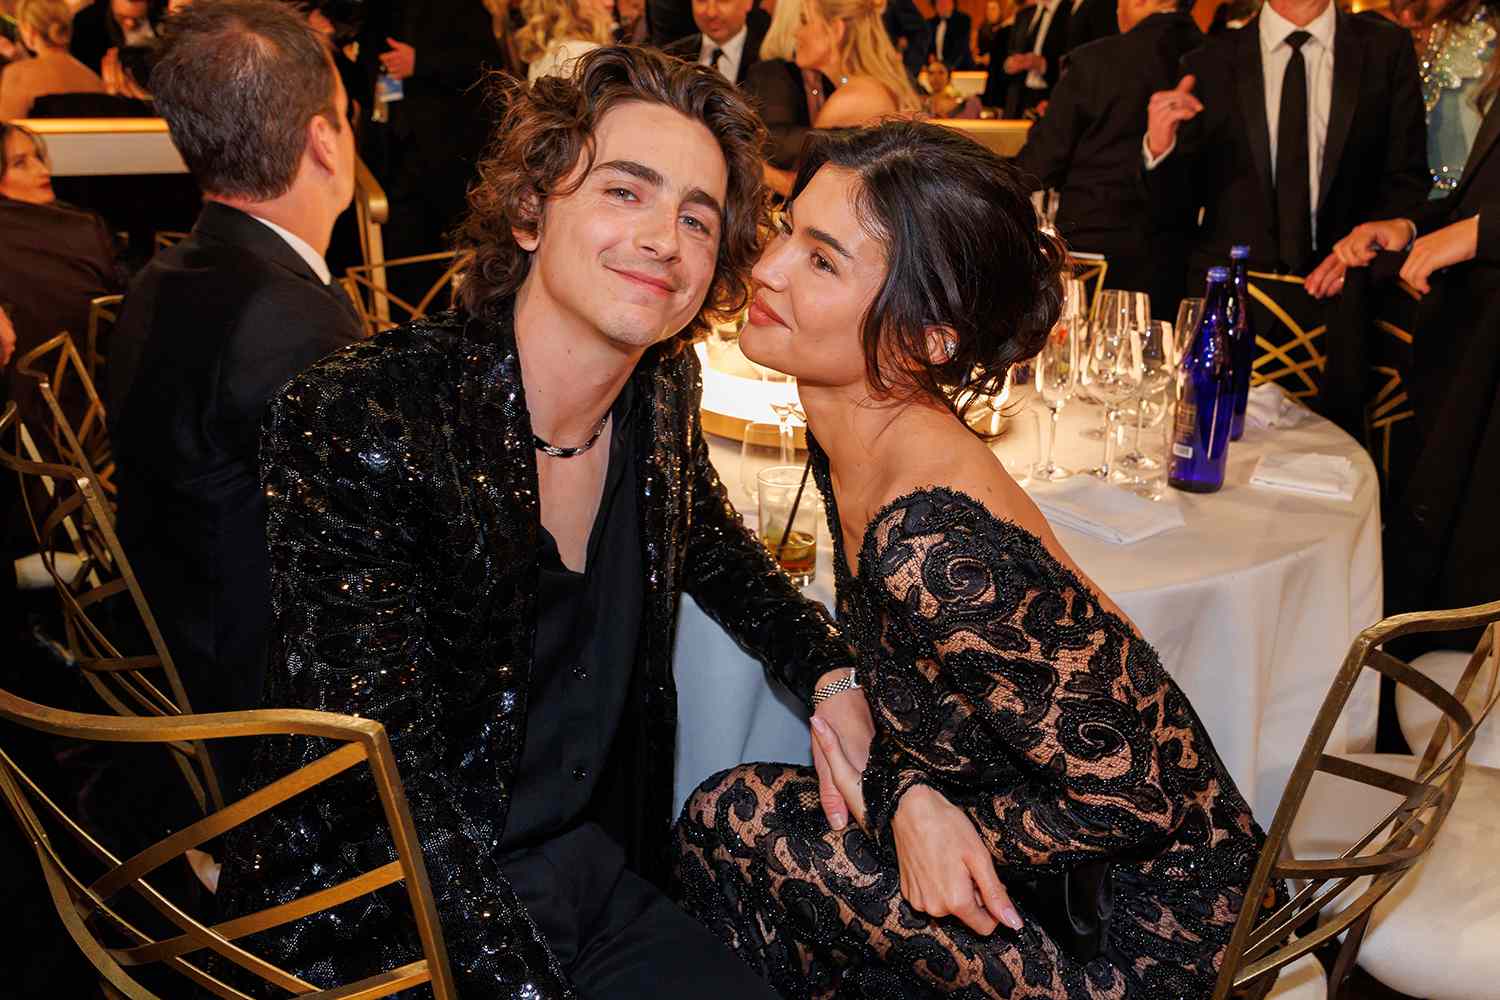 Kylie Jenner Is 'Protective' of Timothée Chalamet Relationship but Always Talks About Him with 'a Huge Smile': Source